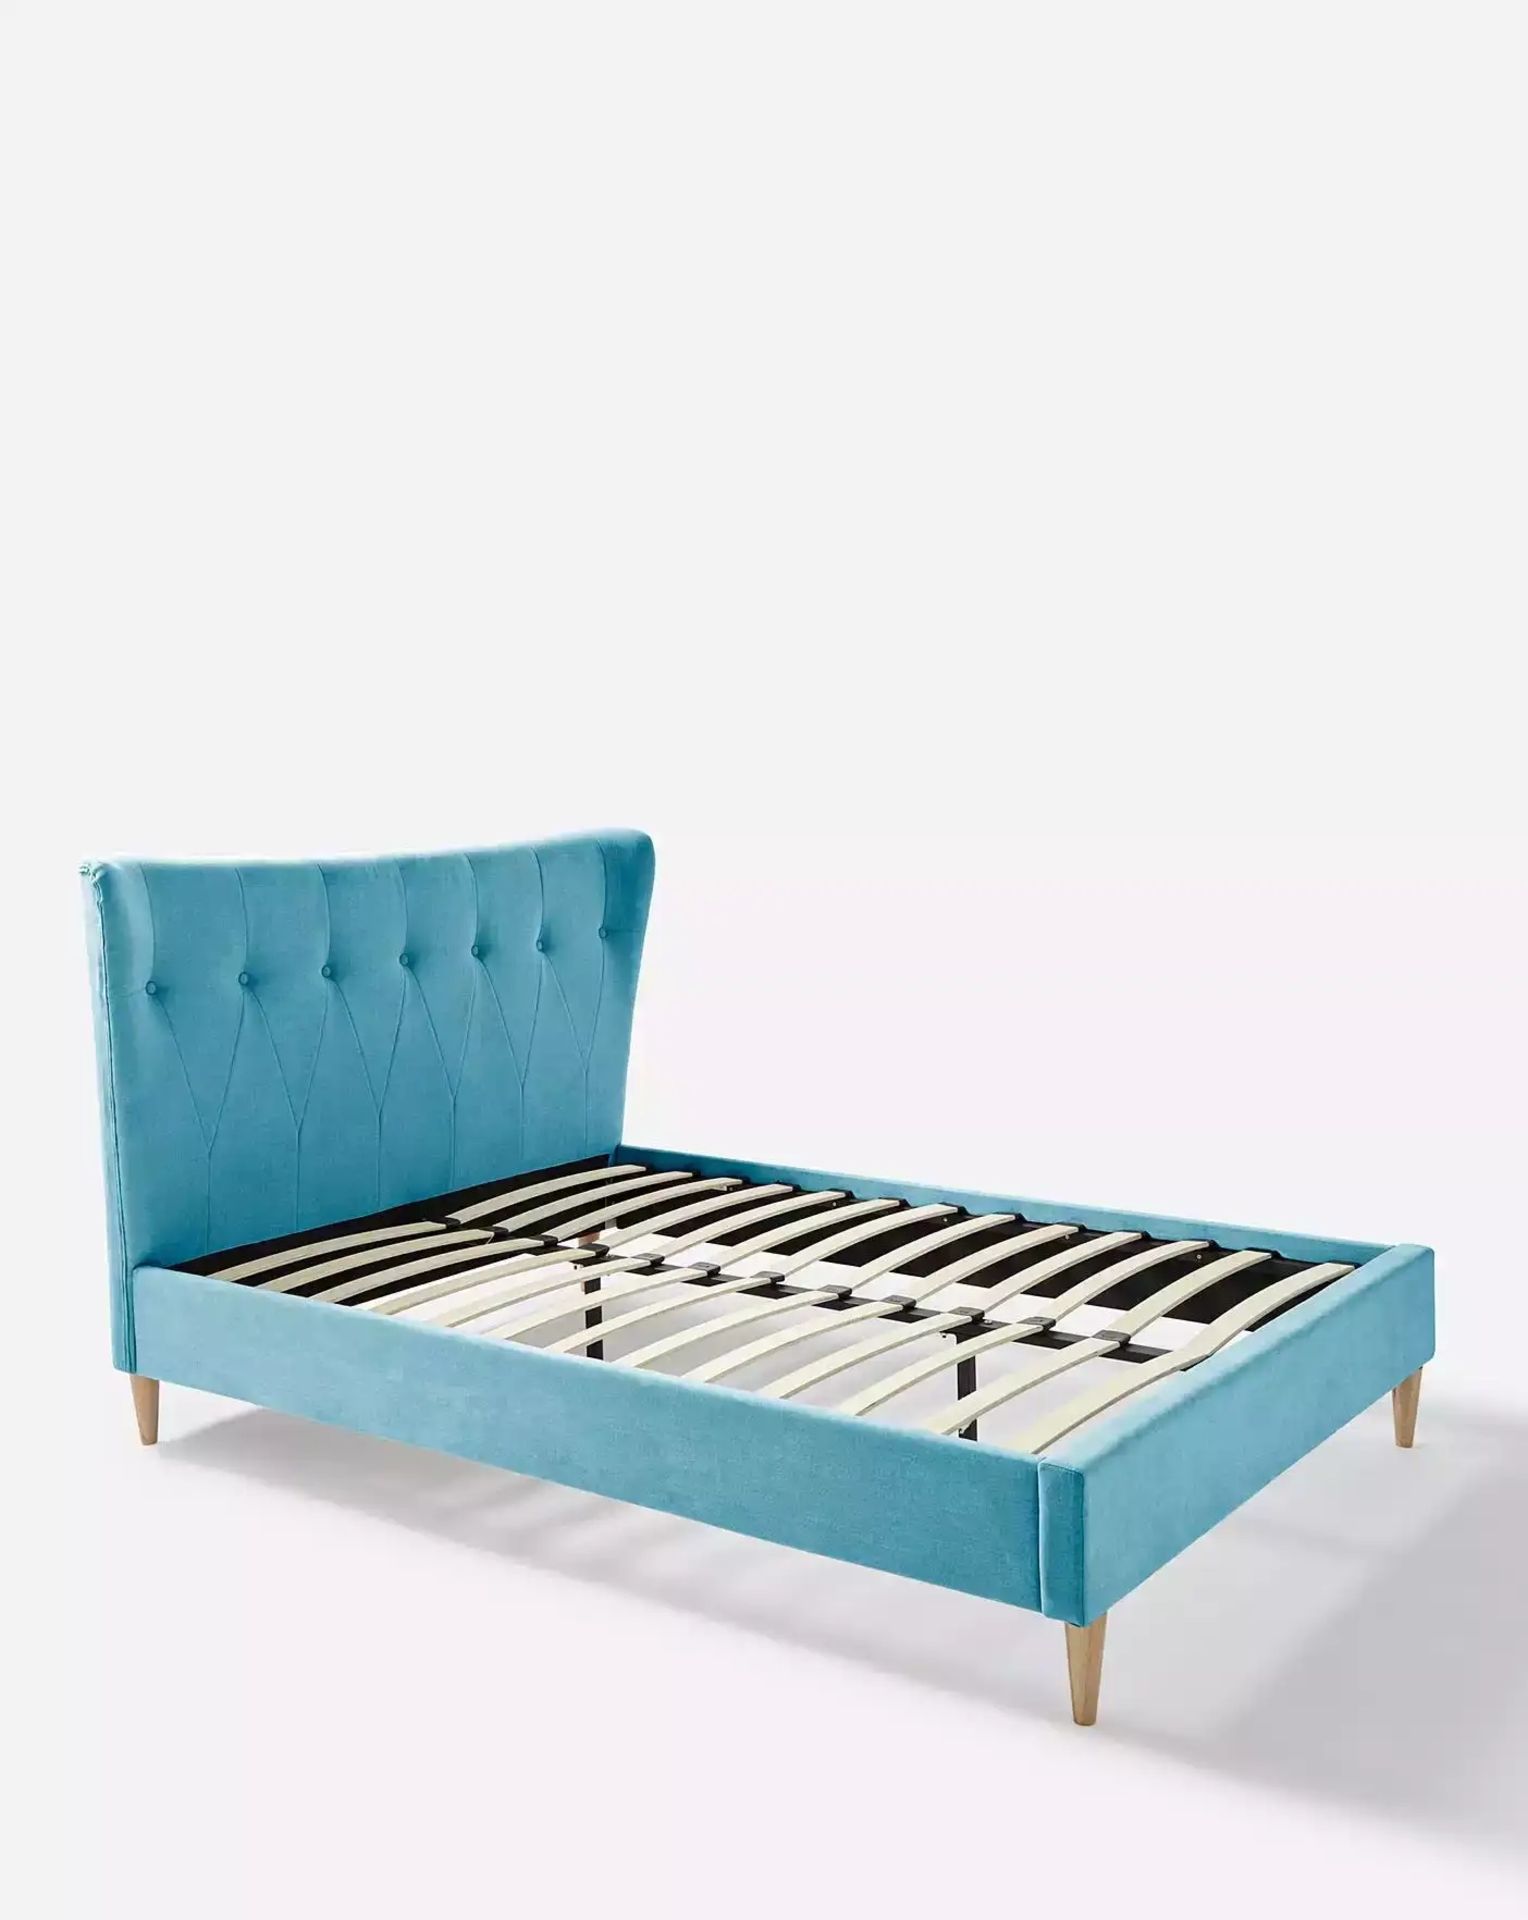 BRAND NEW AVIANA Fabric KINGSIZE Bed Frame. TEAL. RRP £399 EACH. The Aviana Fabric Bed Frame